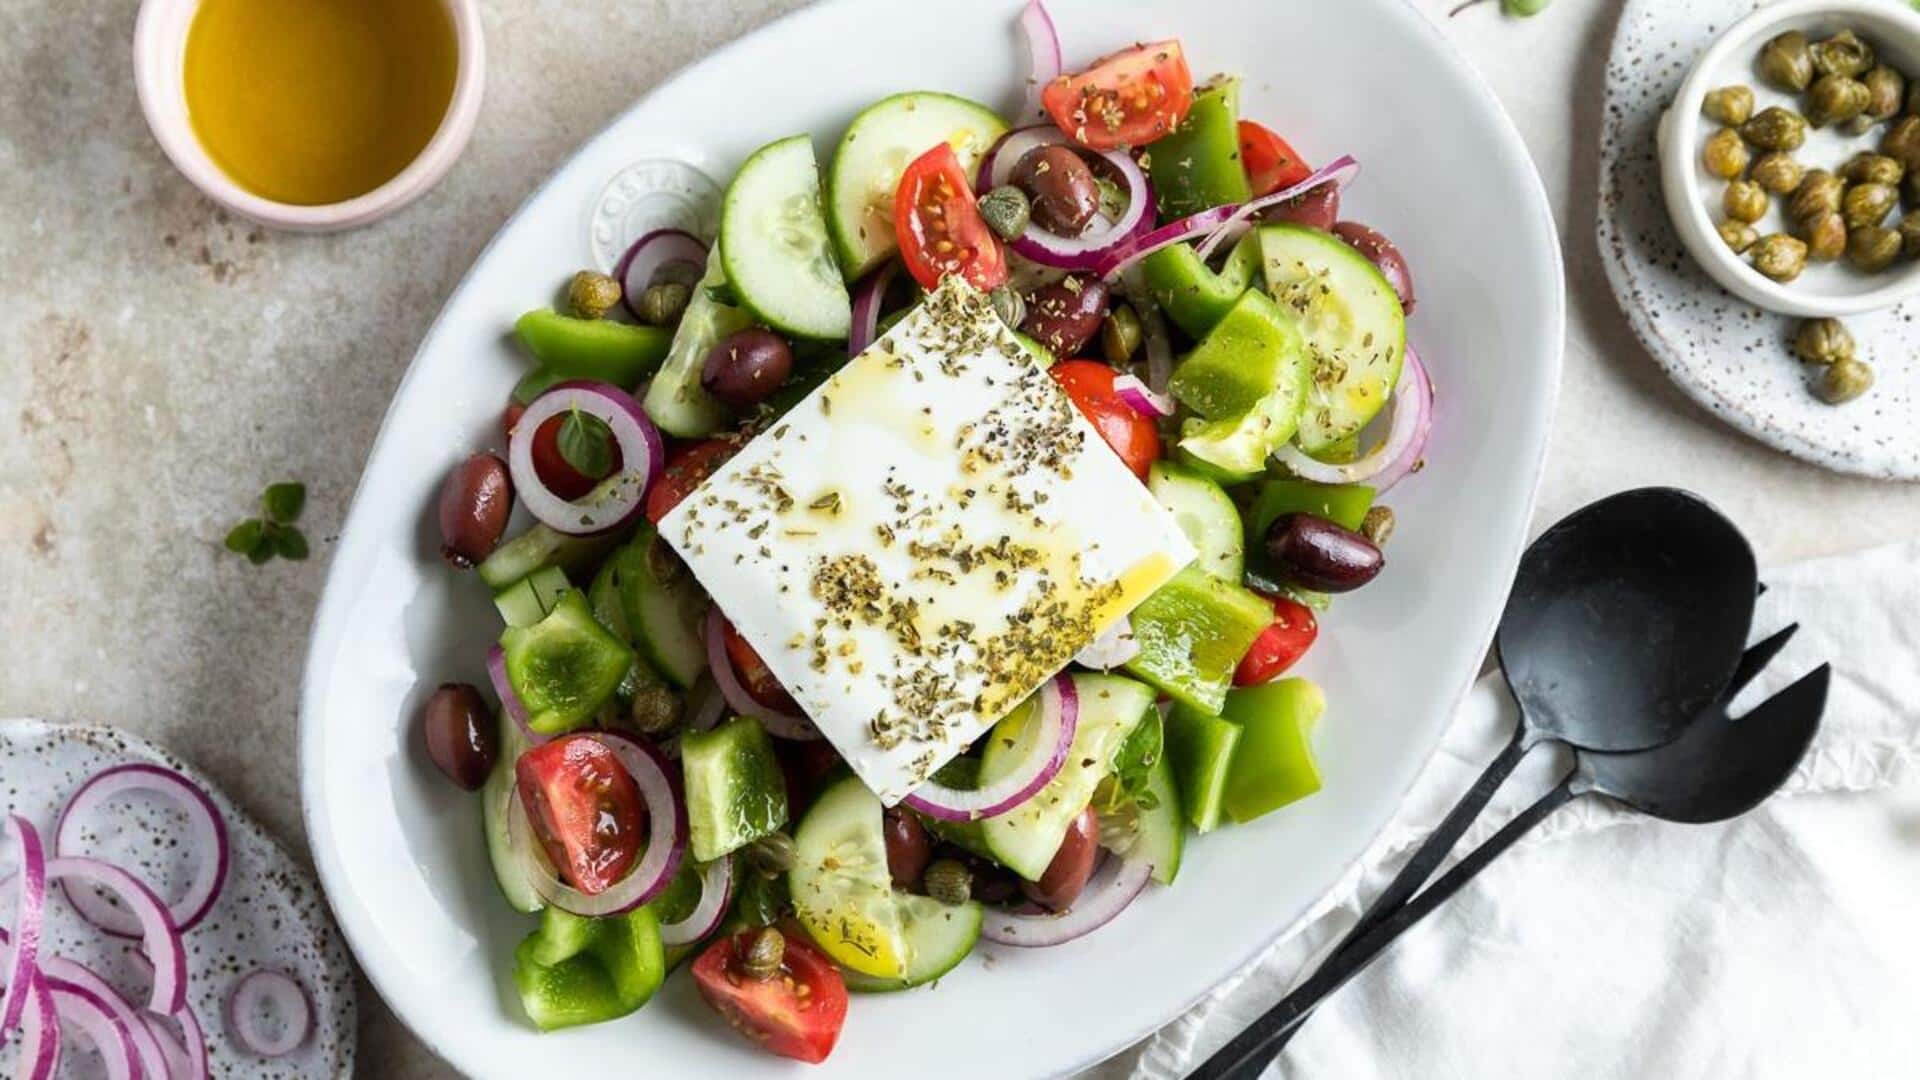 Try this Greek horiatiki salad recipe for a flavorsome day